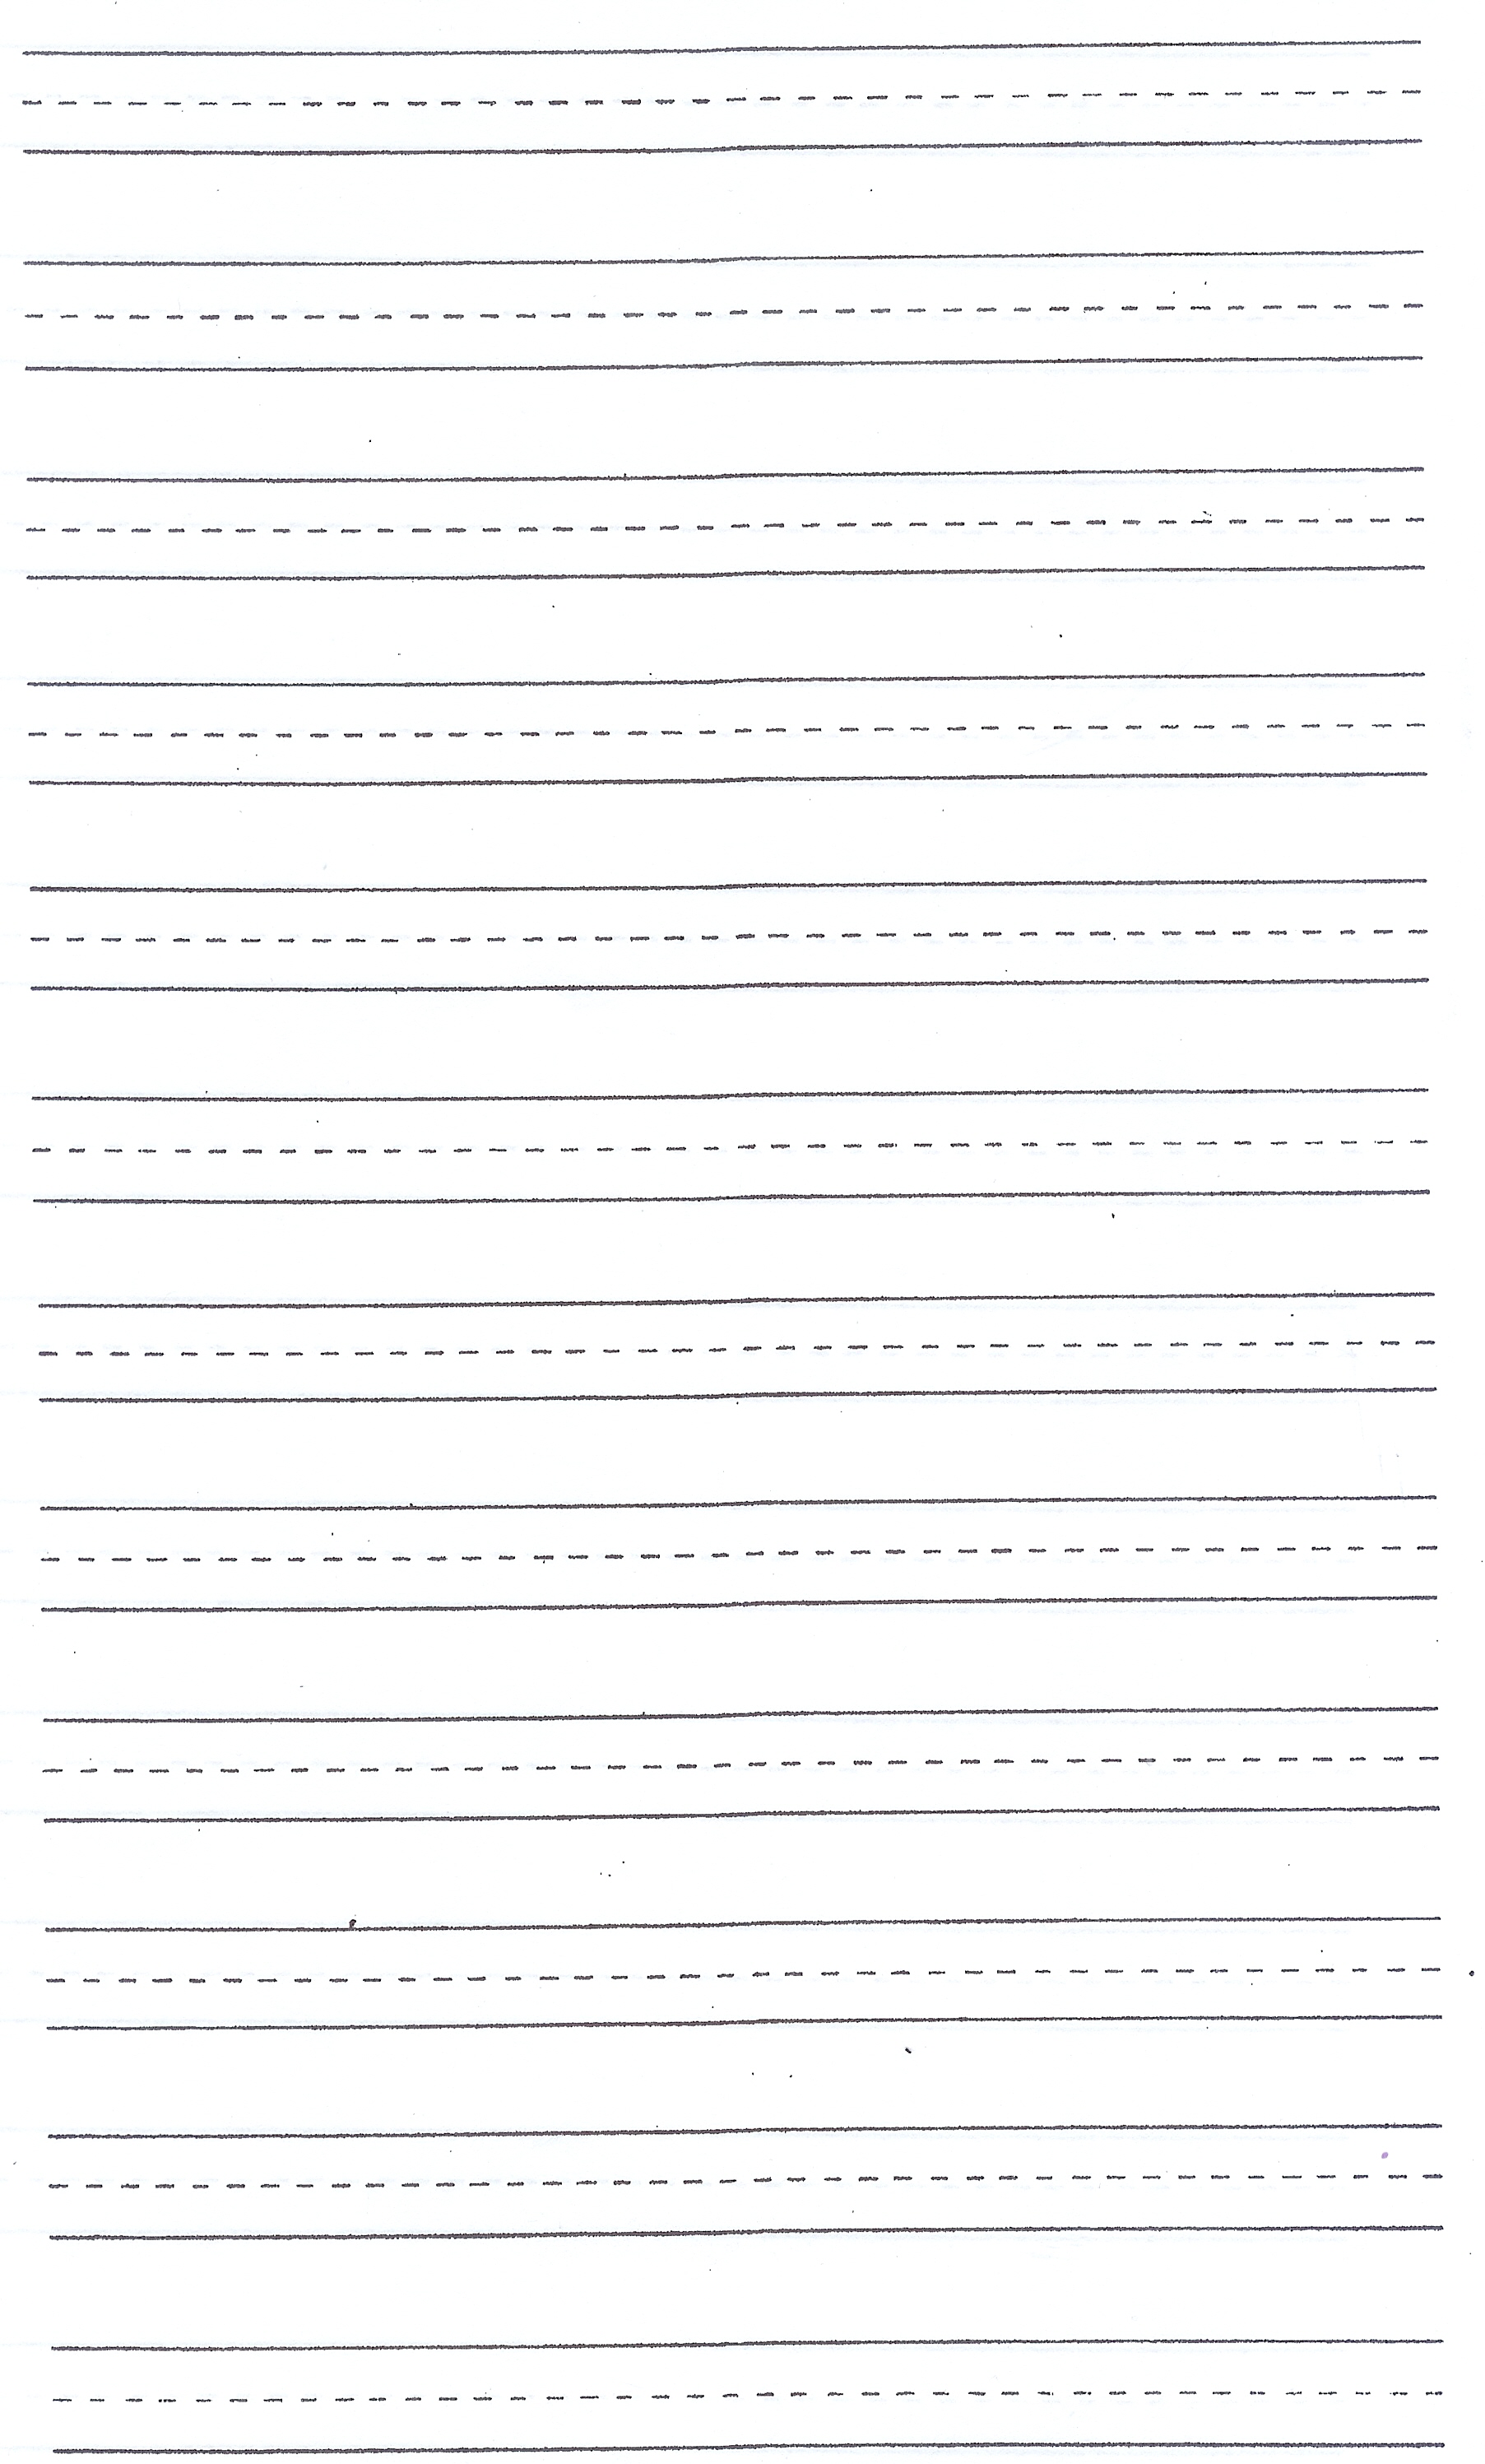 6-best-images-of-first-grade-writing-paper-printable-printable-first